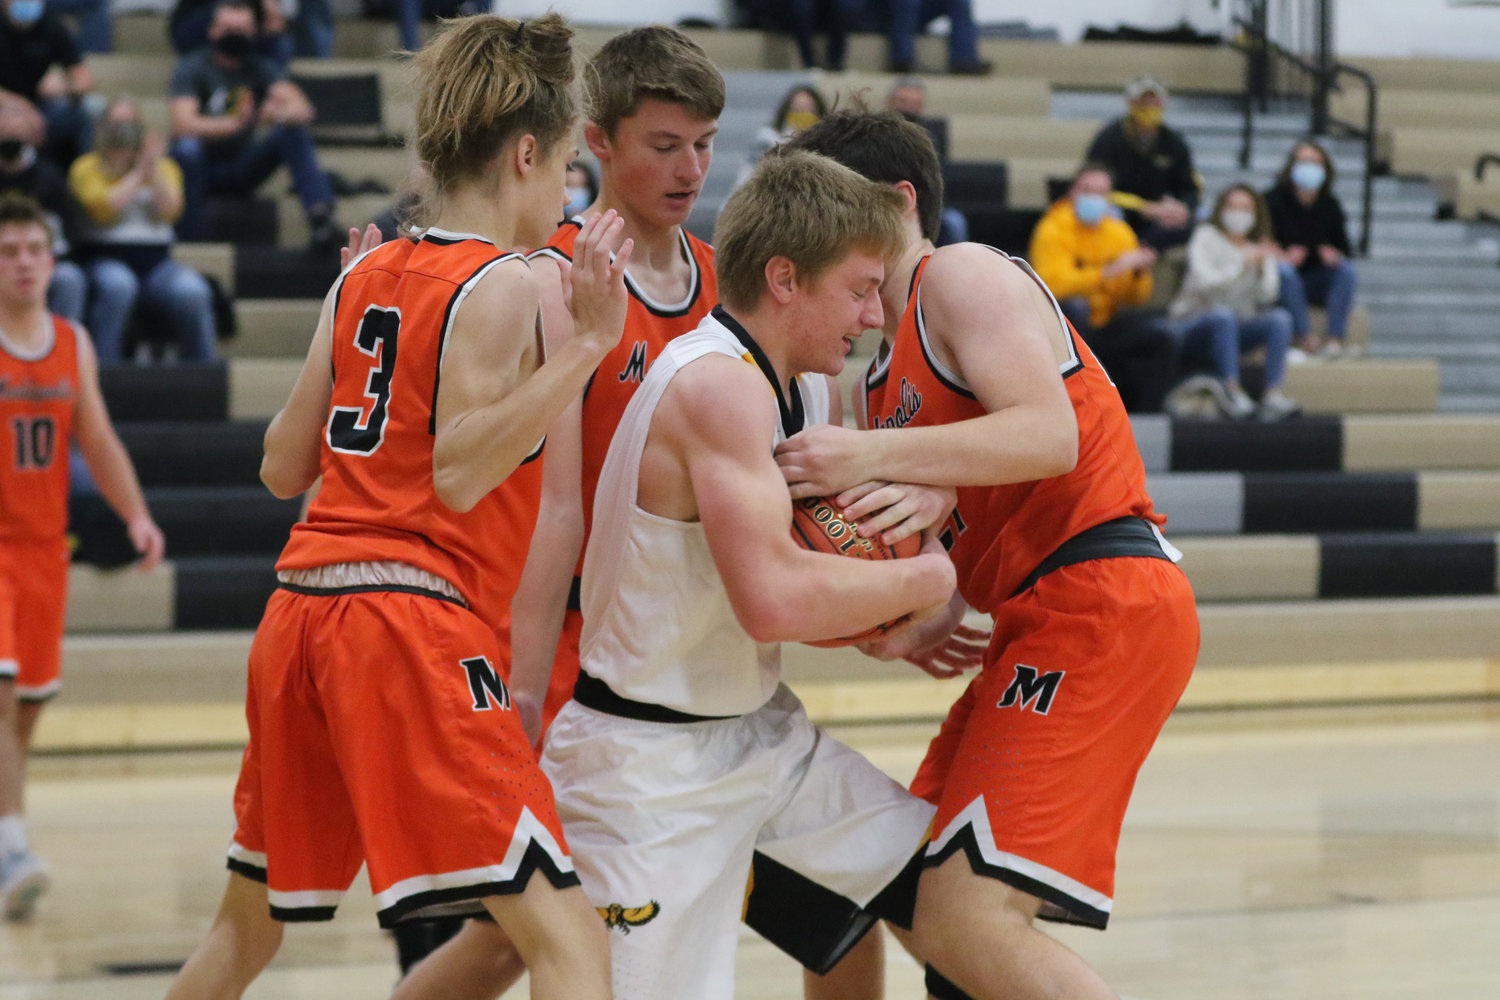 Luke Boyse is surrounded by Bulldog defenders after grabbing a rebound during the first quarter of a scrimmage with Mediapolis in Wellman on Saturday, November 21.